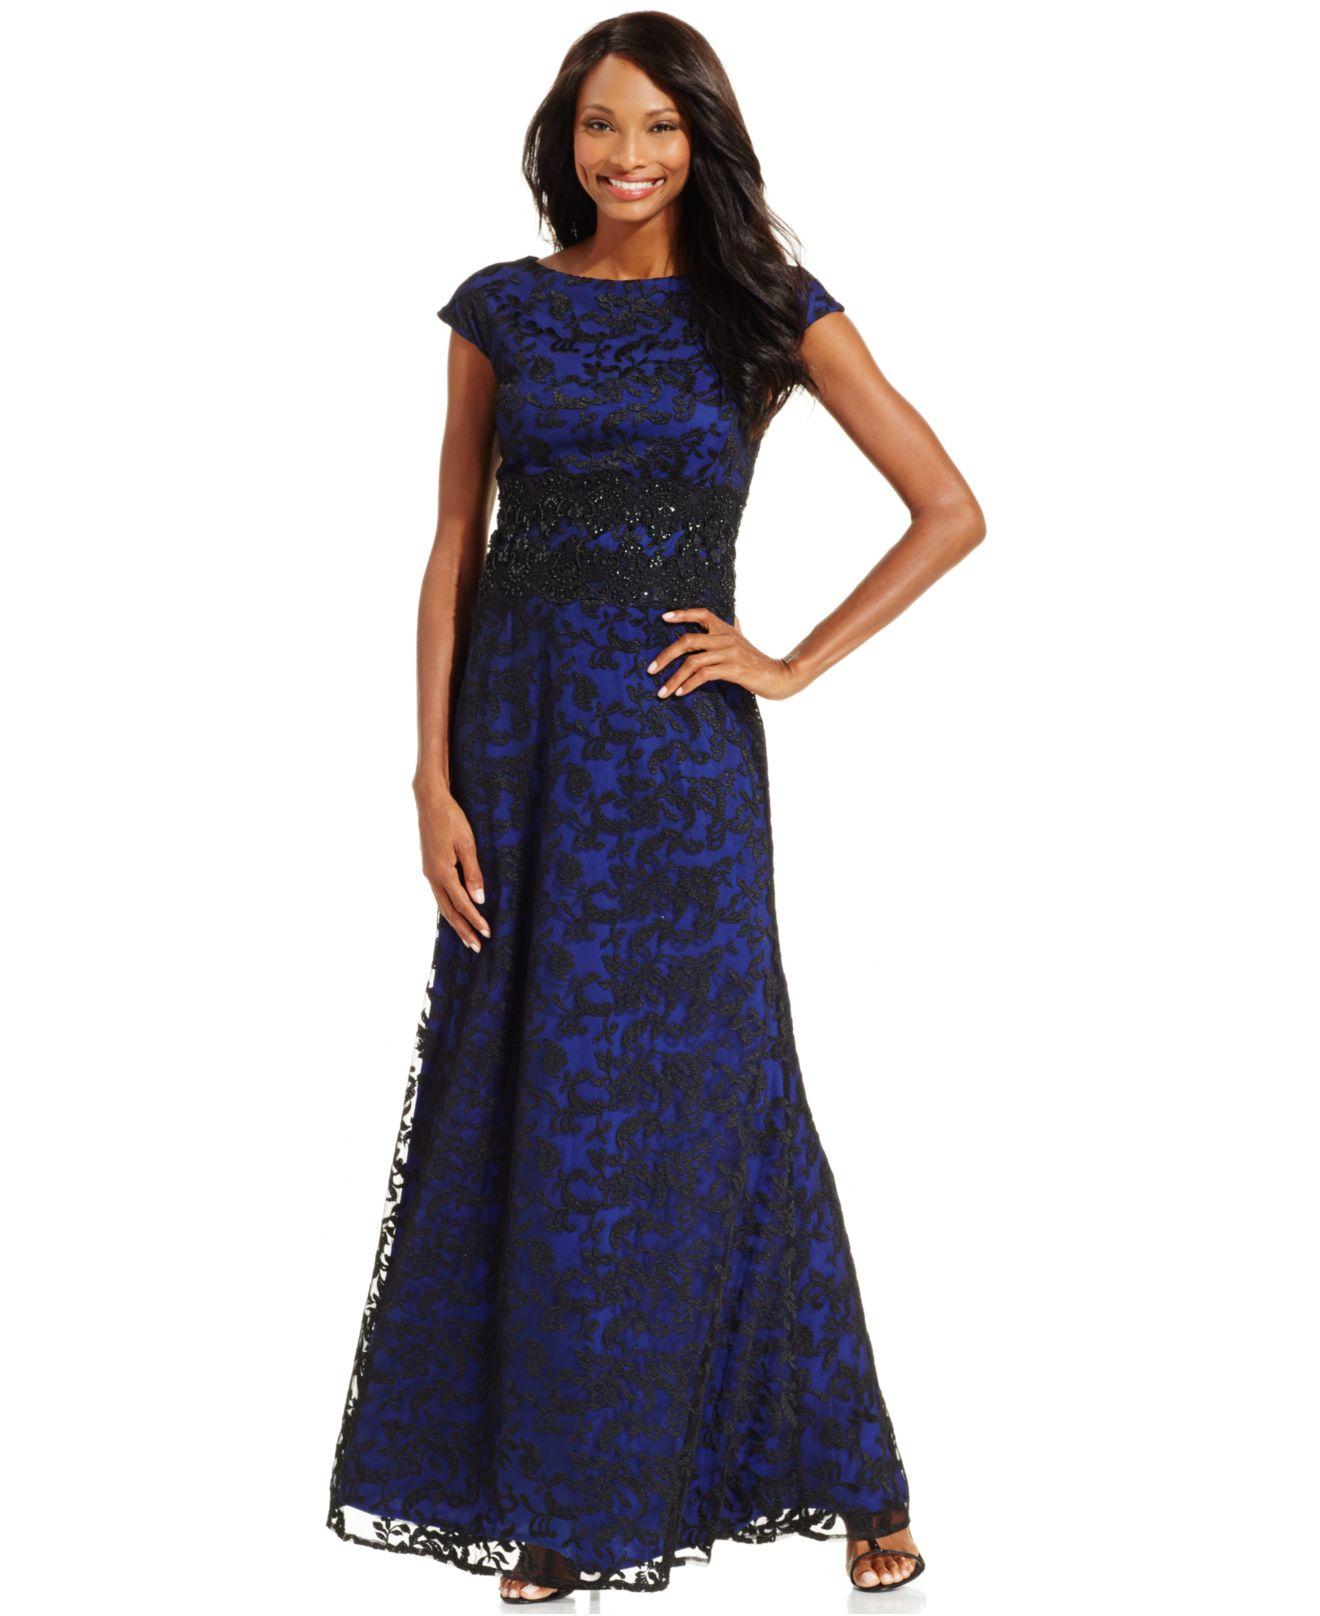 Lyst - Alex Evenings Embroidered Lace Cap-sleeve Gown in Blue